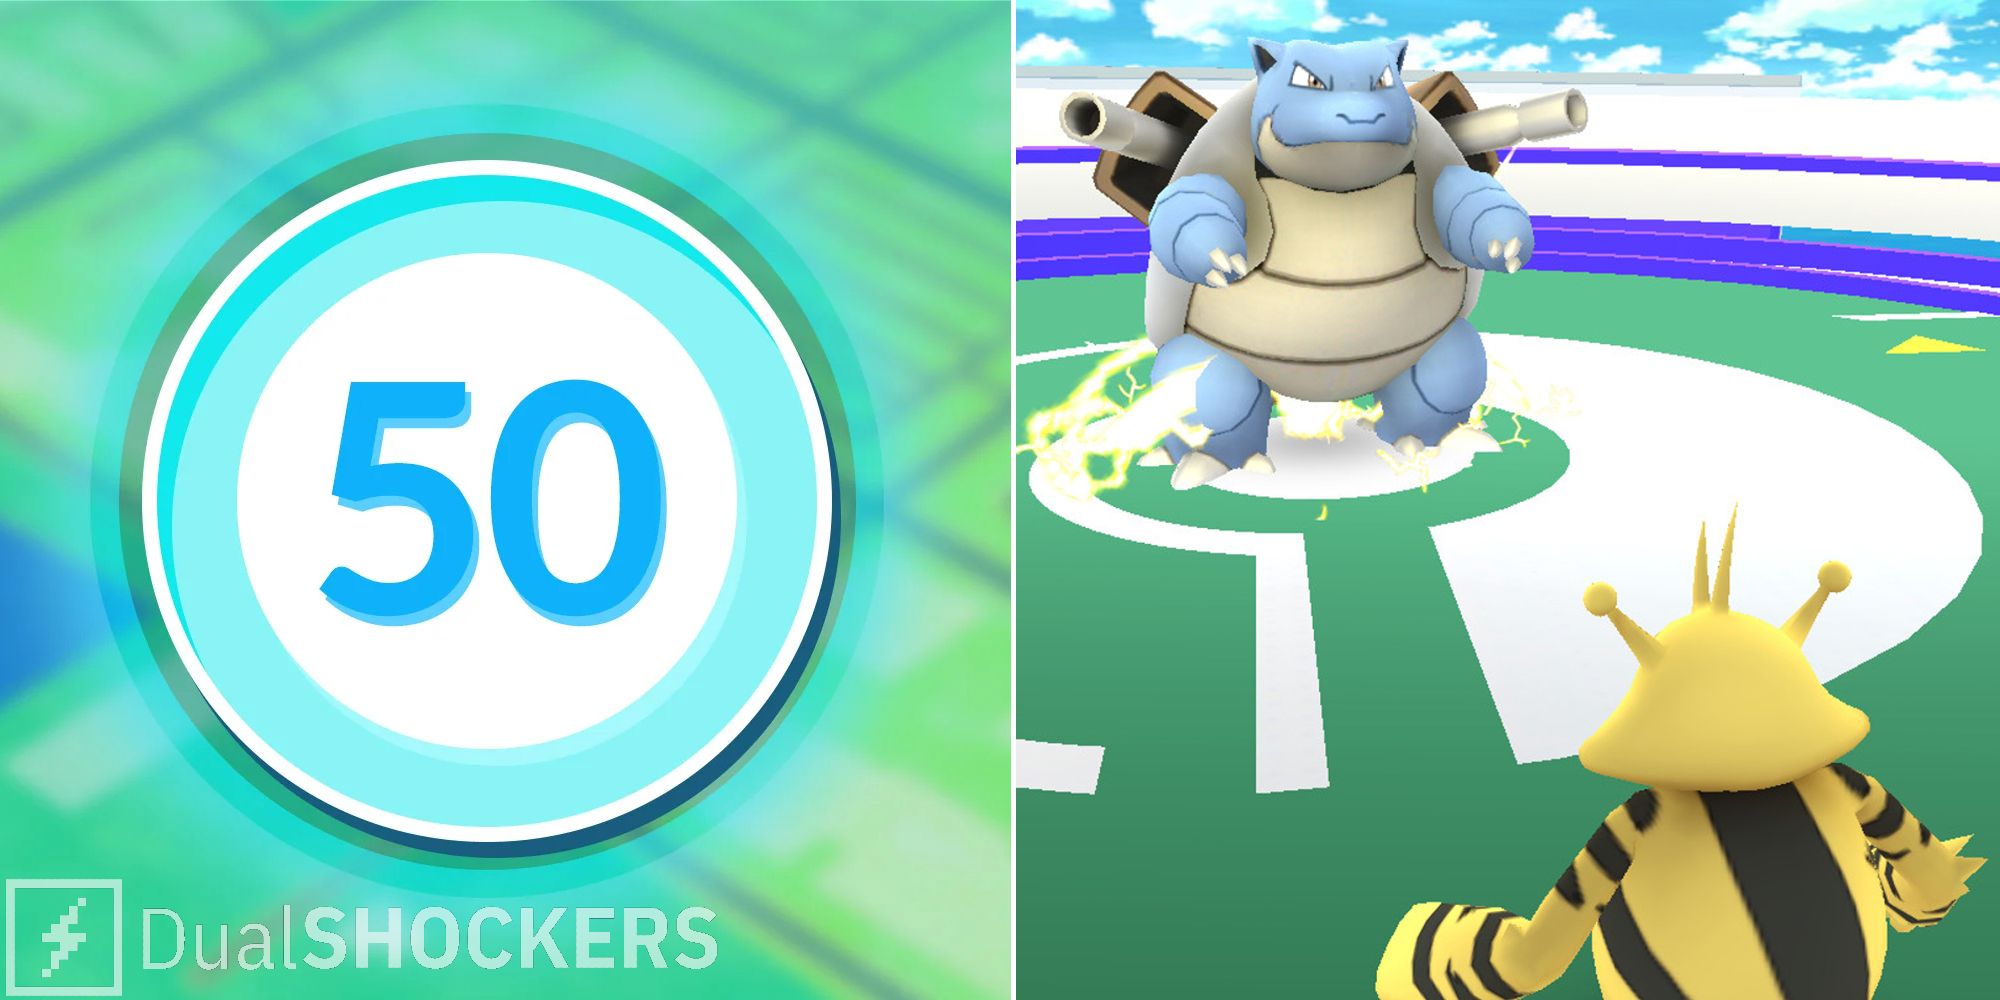 How to Gain XP and Level Up Fast in Pokémon GO